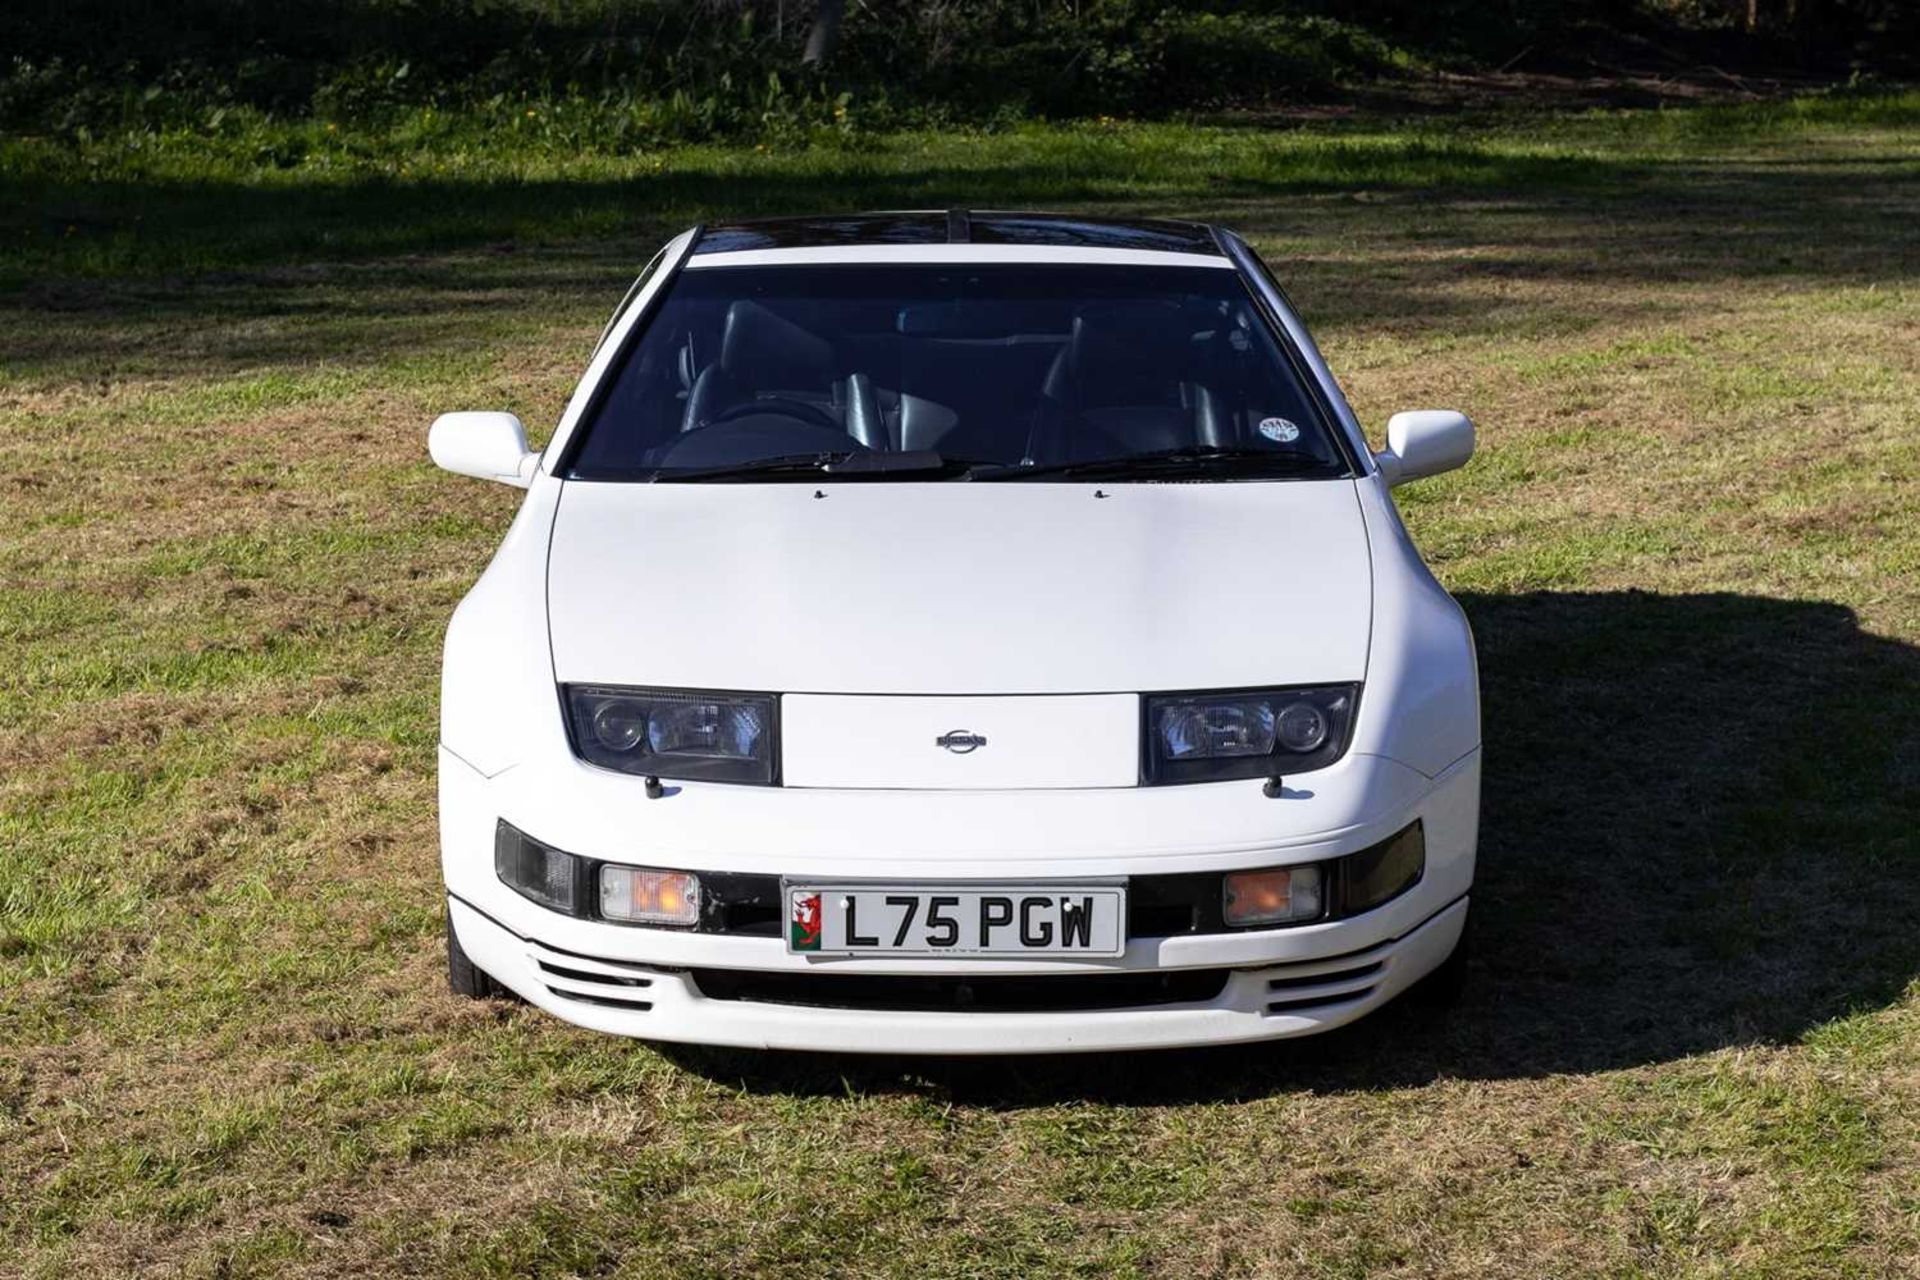 1990 Nissan 300ZX Turbo 2+2 Targa One of the last examples registered in the UK - Image 8 of 89